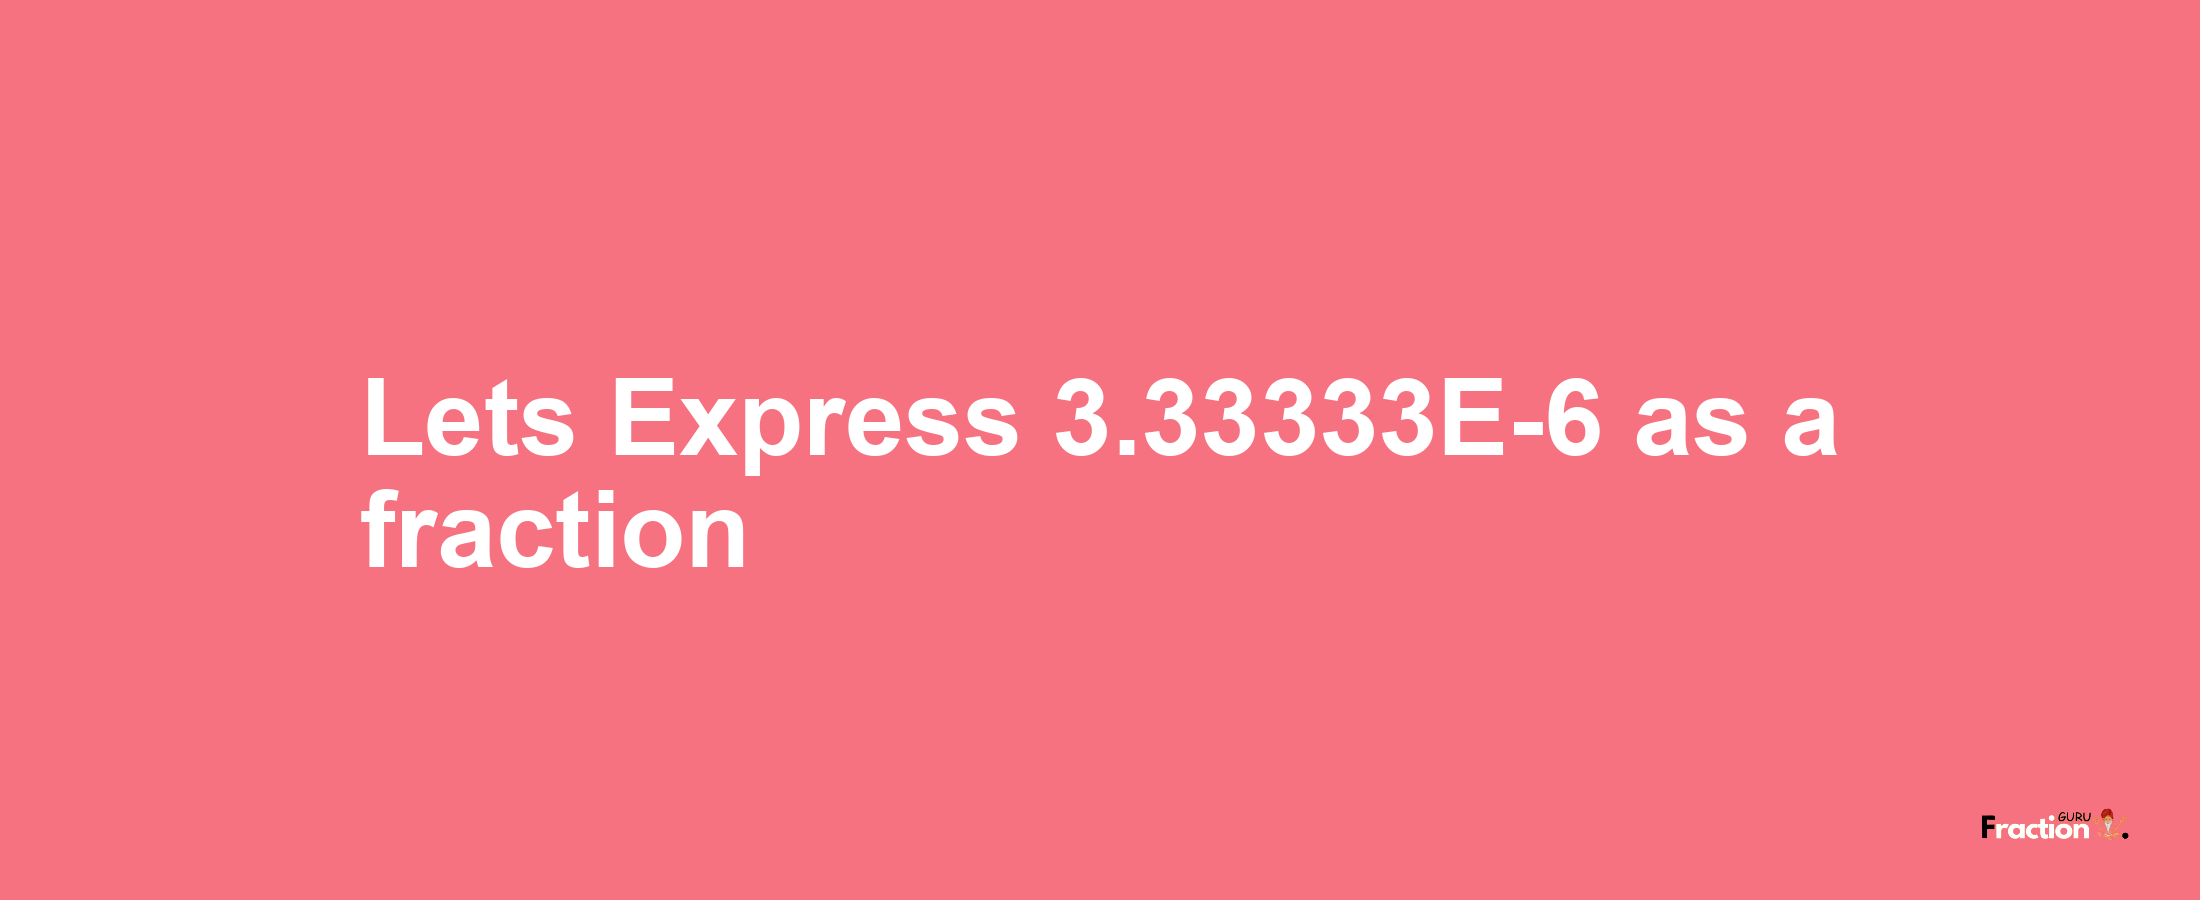 Lets Express 3.33333E-6 as afraction